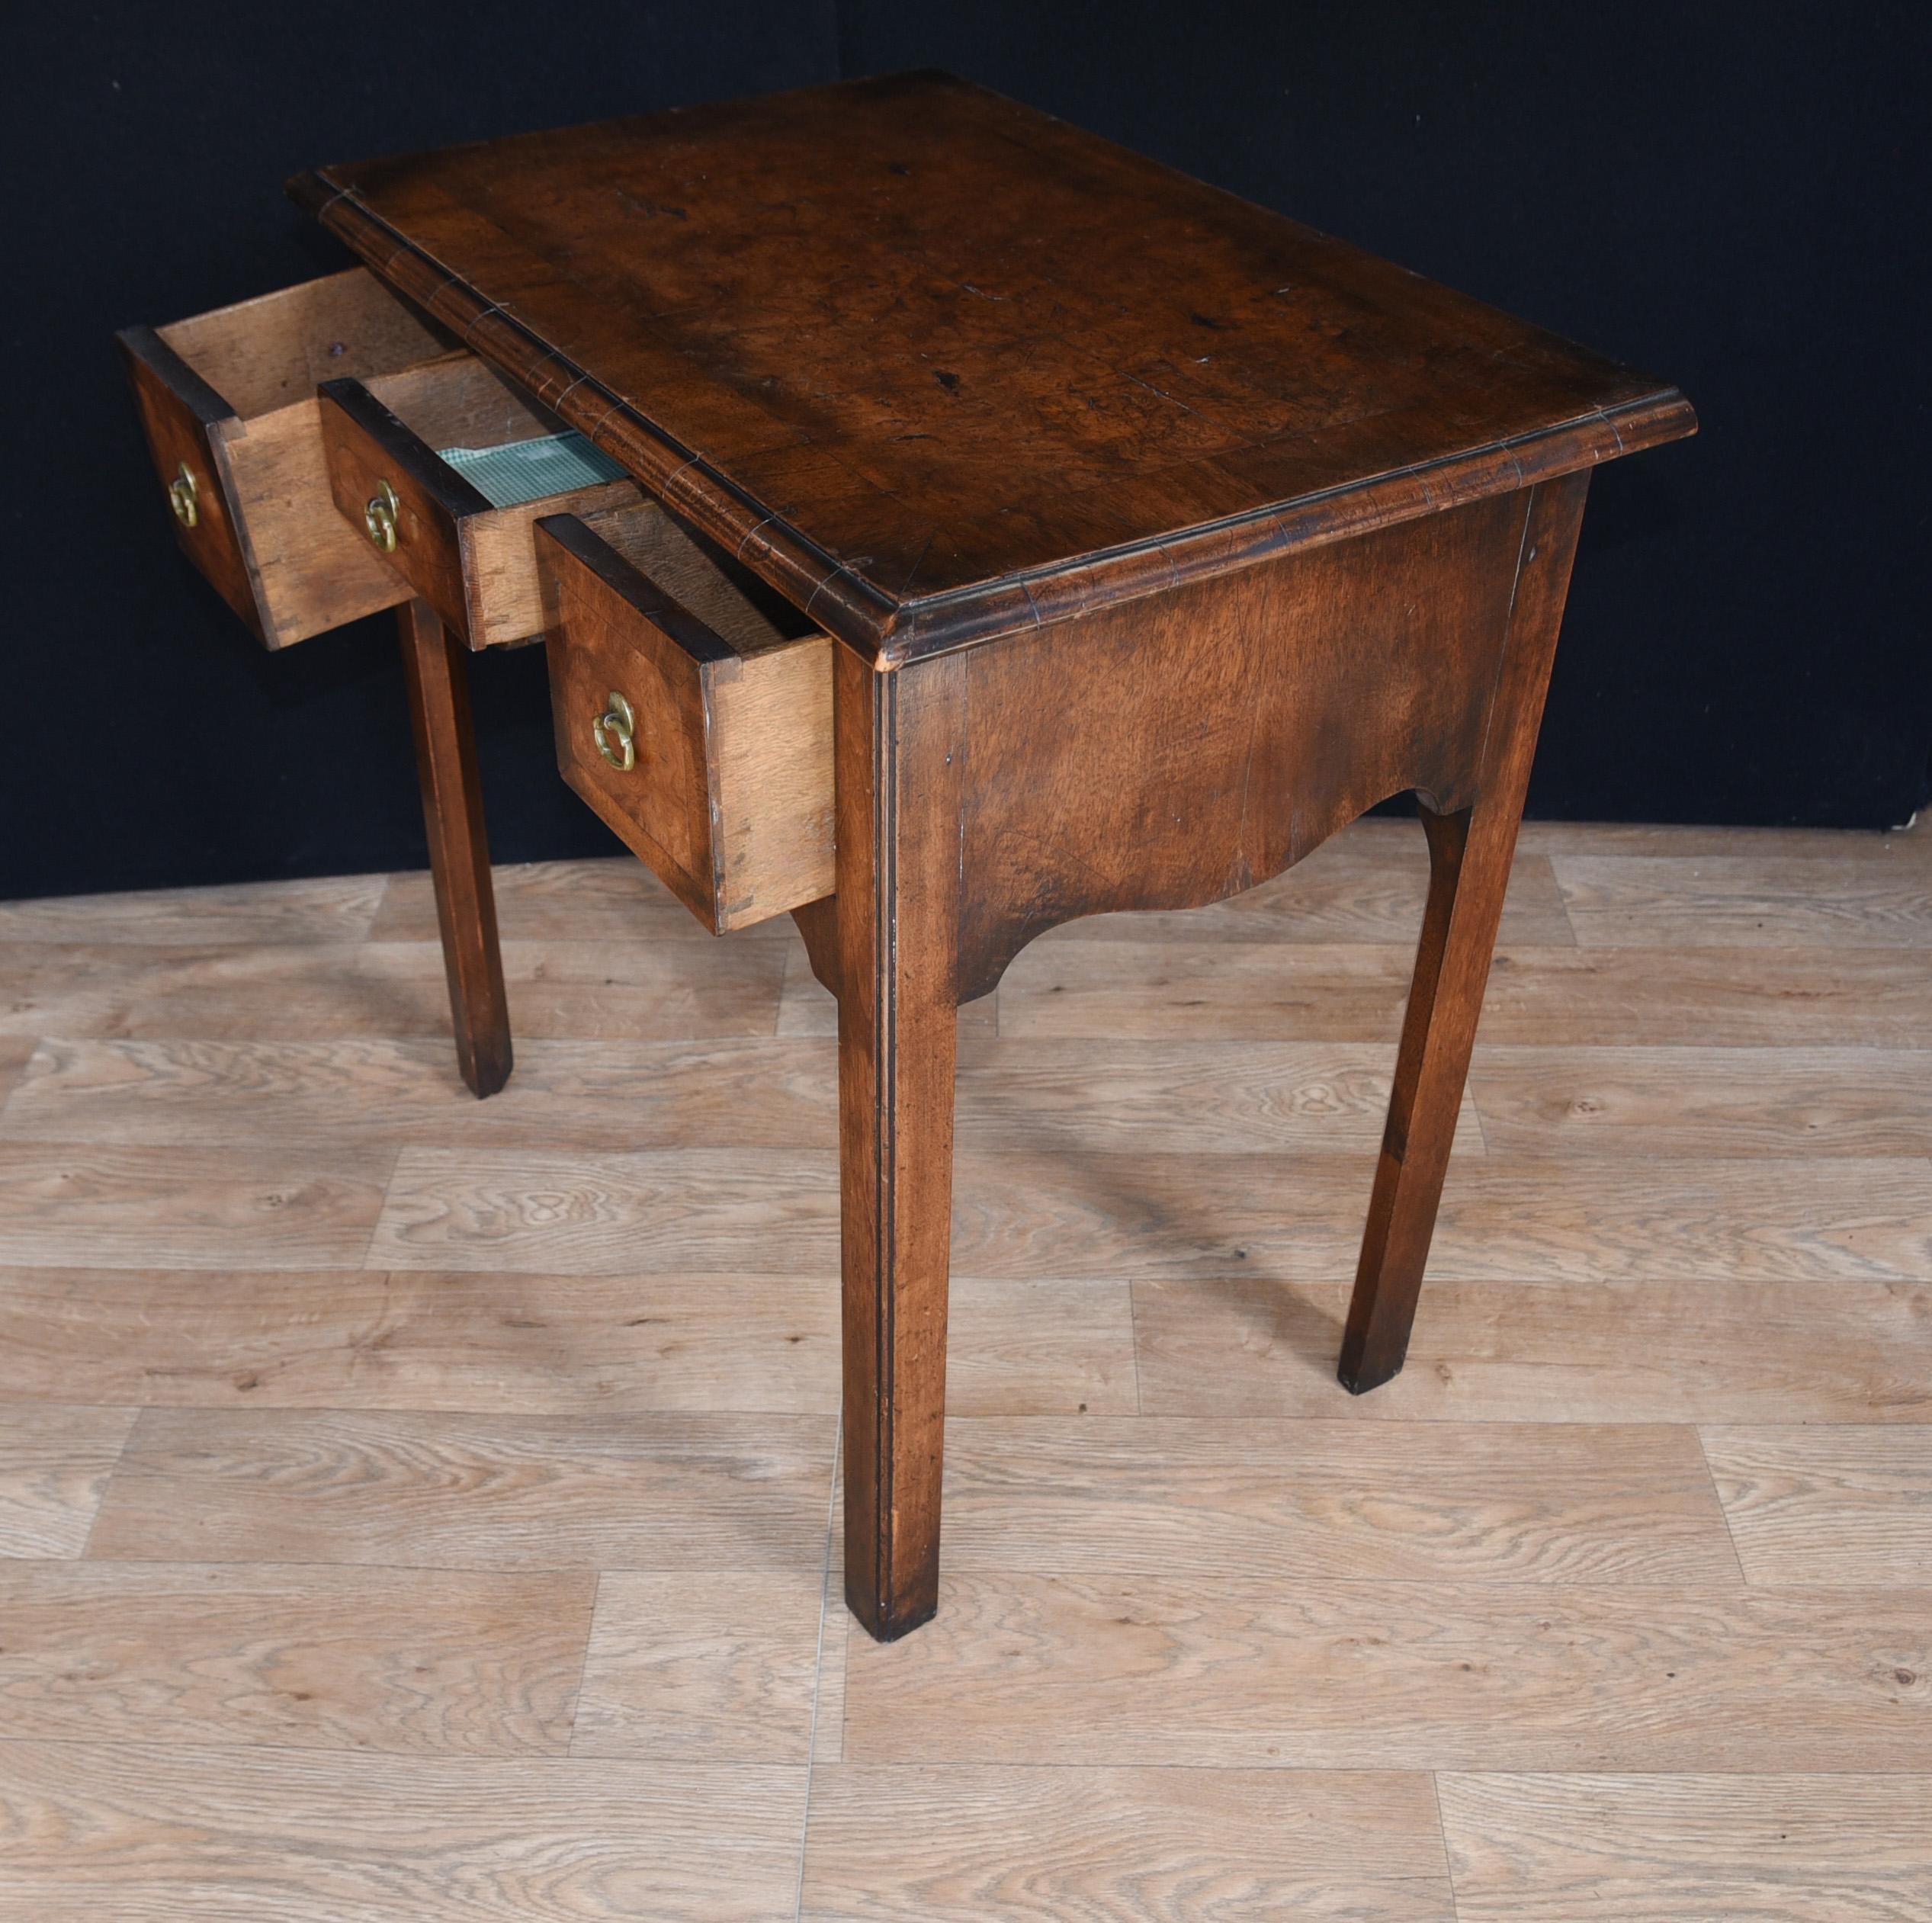 Early 19th Century Queen Anne Low Boy Elm Wood Table 1820